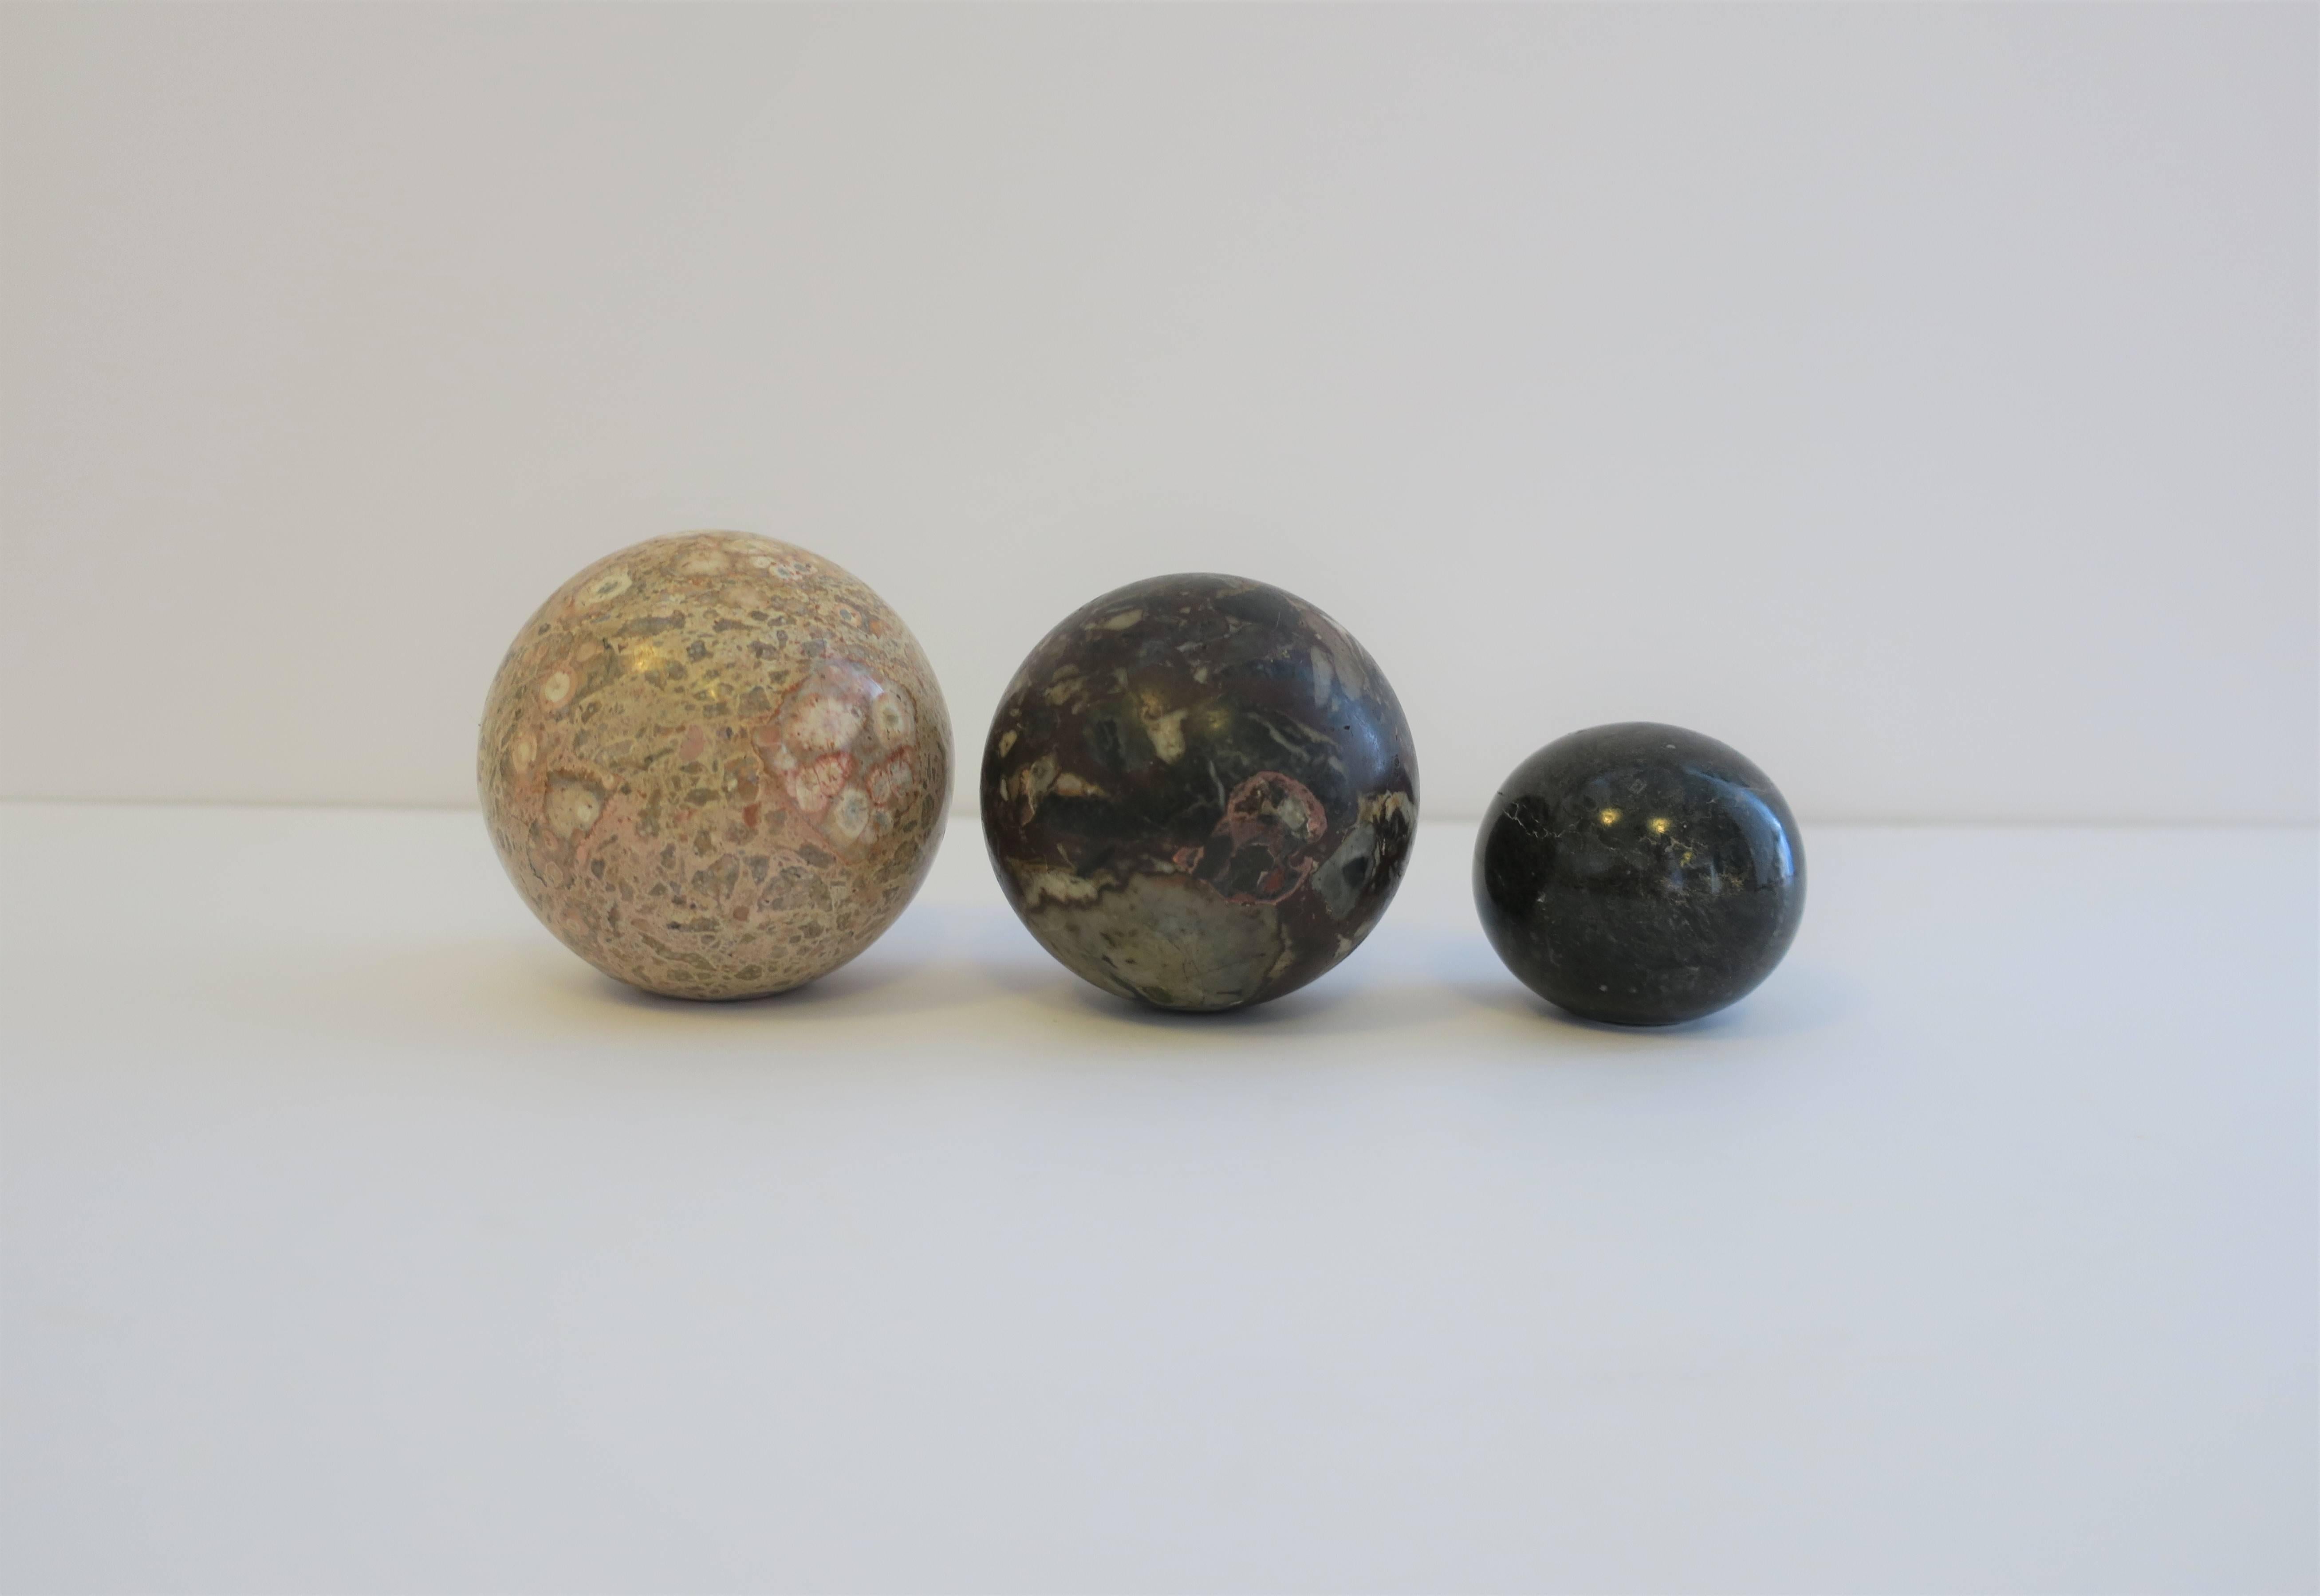 A set of three modern marble stone decorative spheres, circa 1970s. Black sphere has a 'flat' bottom 

Amongst the three sphere's, colors include: cream, sand, very light pink or flesh color, blue, green, black, dark red and traces of